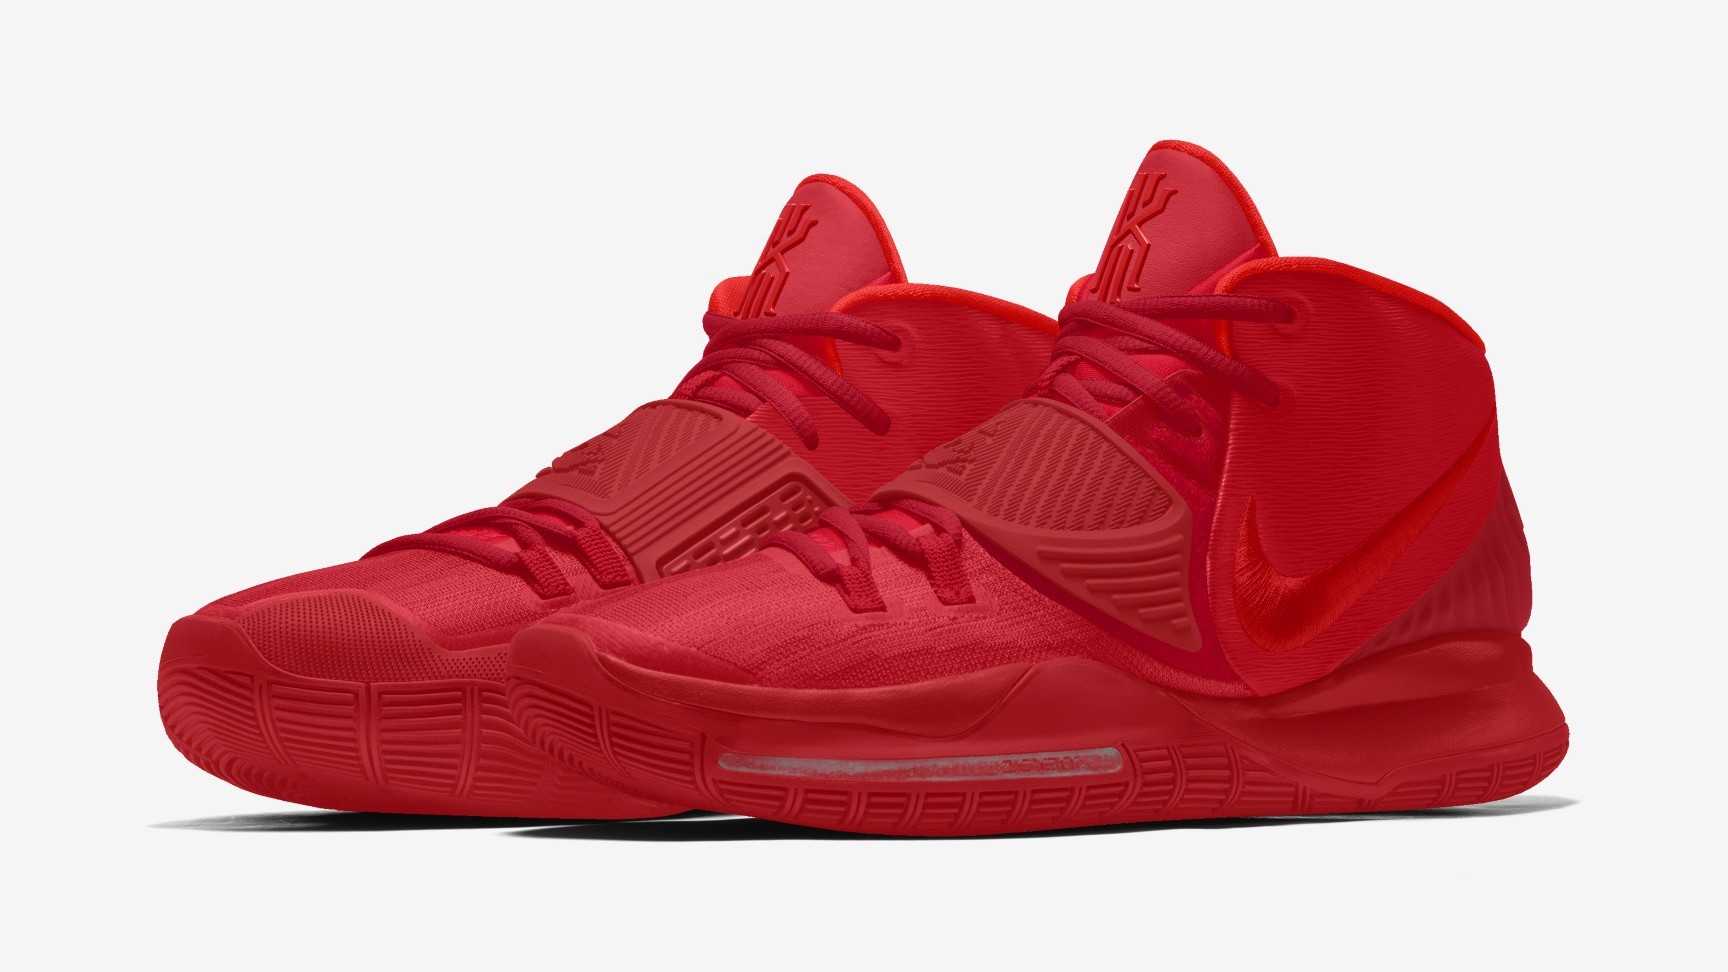 kyrie red october